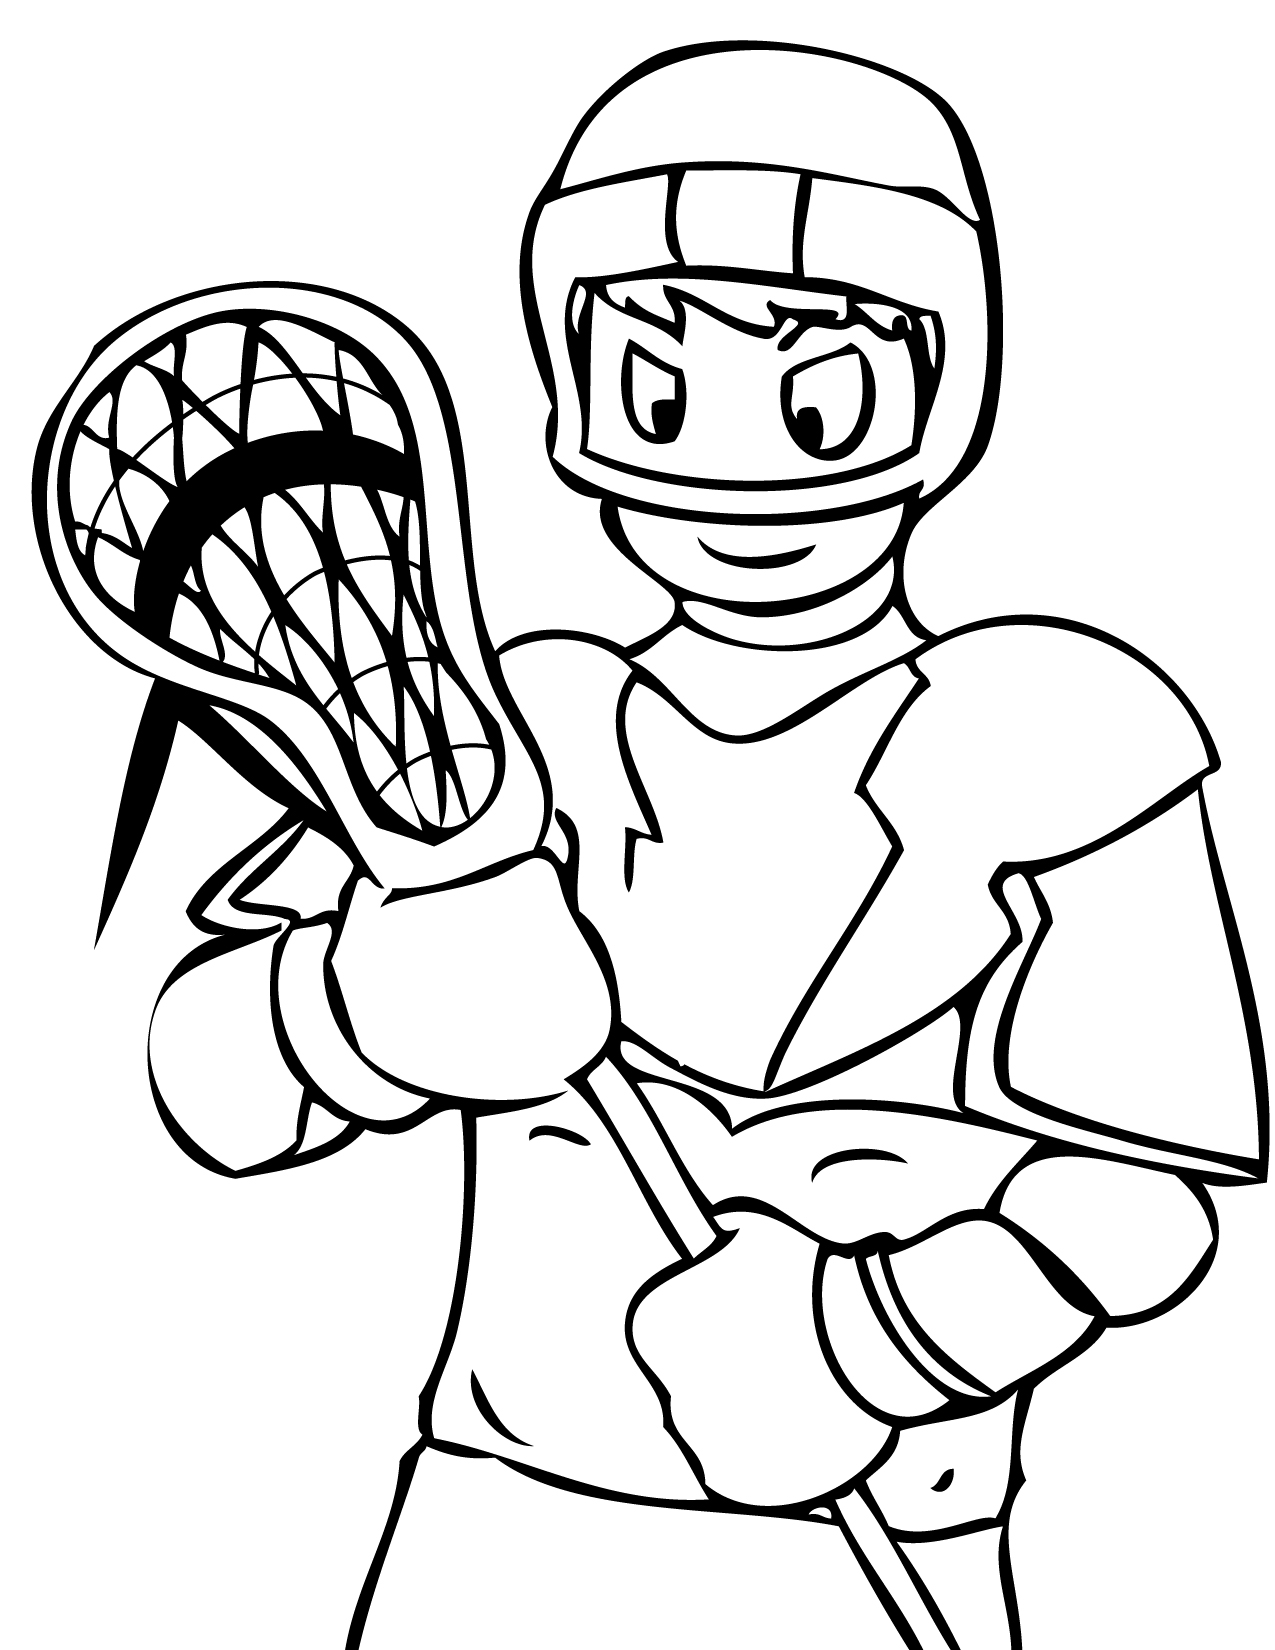 Boy Playing Lacrosse Coloring Page - Free Printable Coloring Pages ...